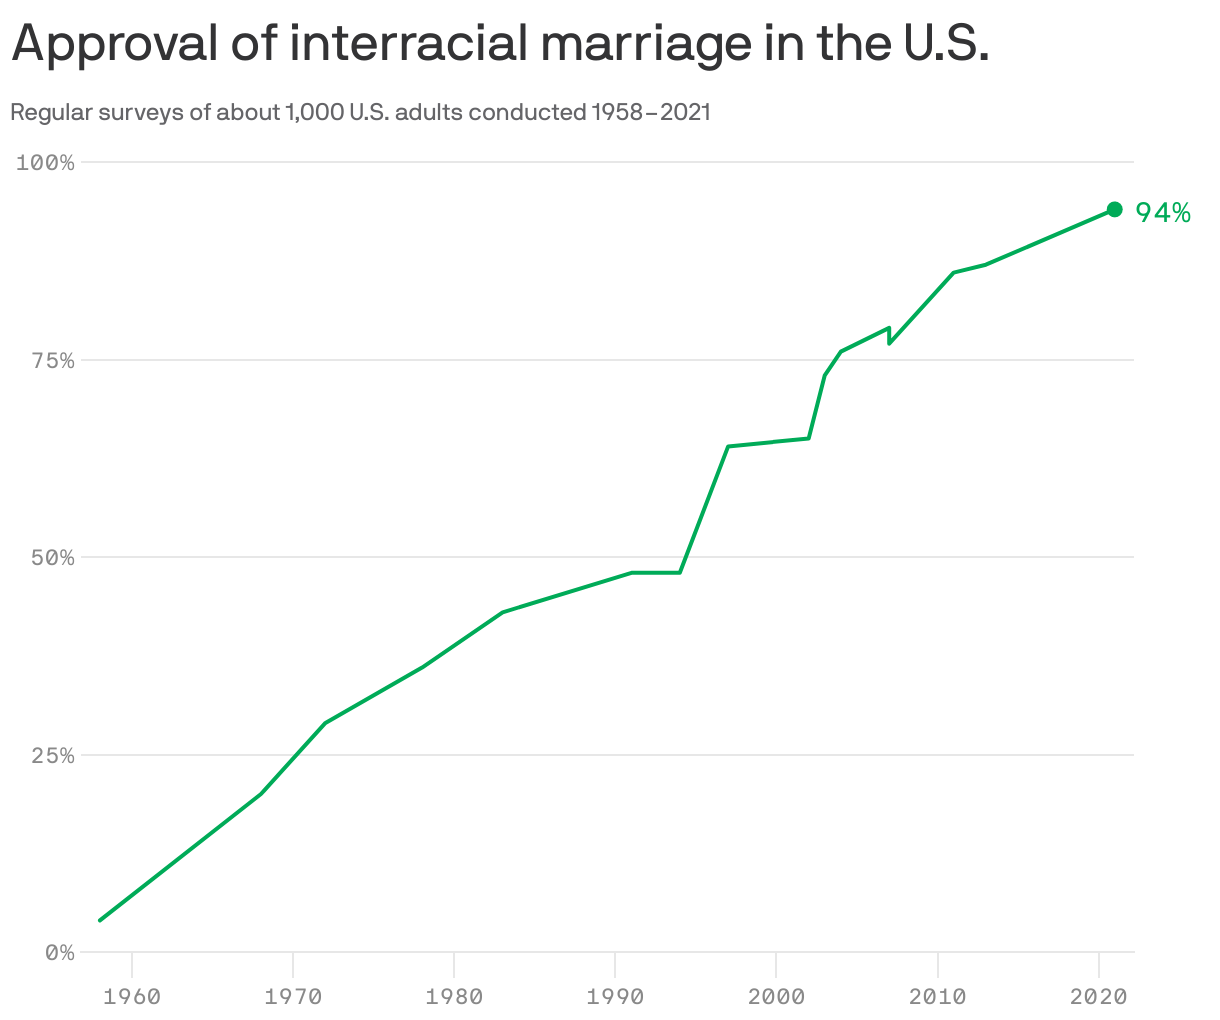 Approval of interracial marriage in the U.S.